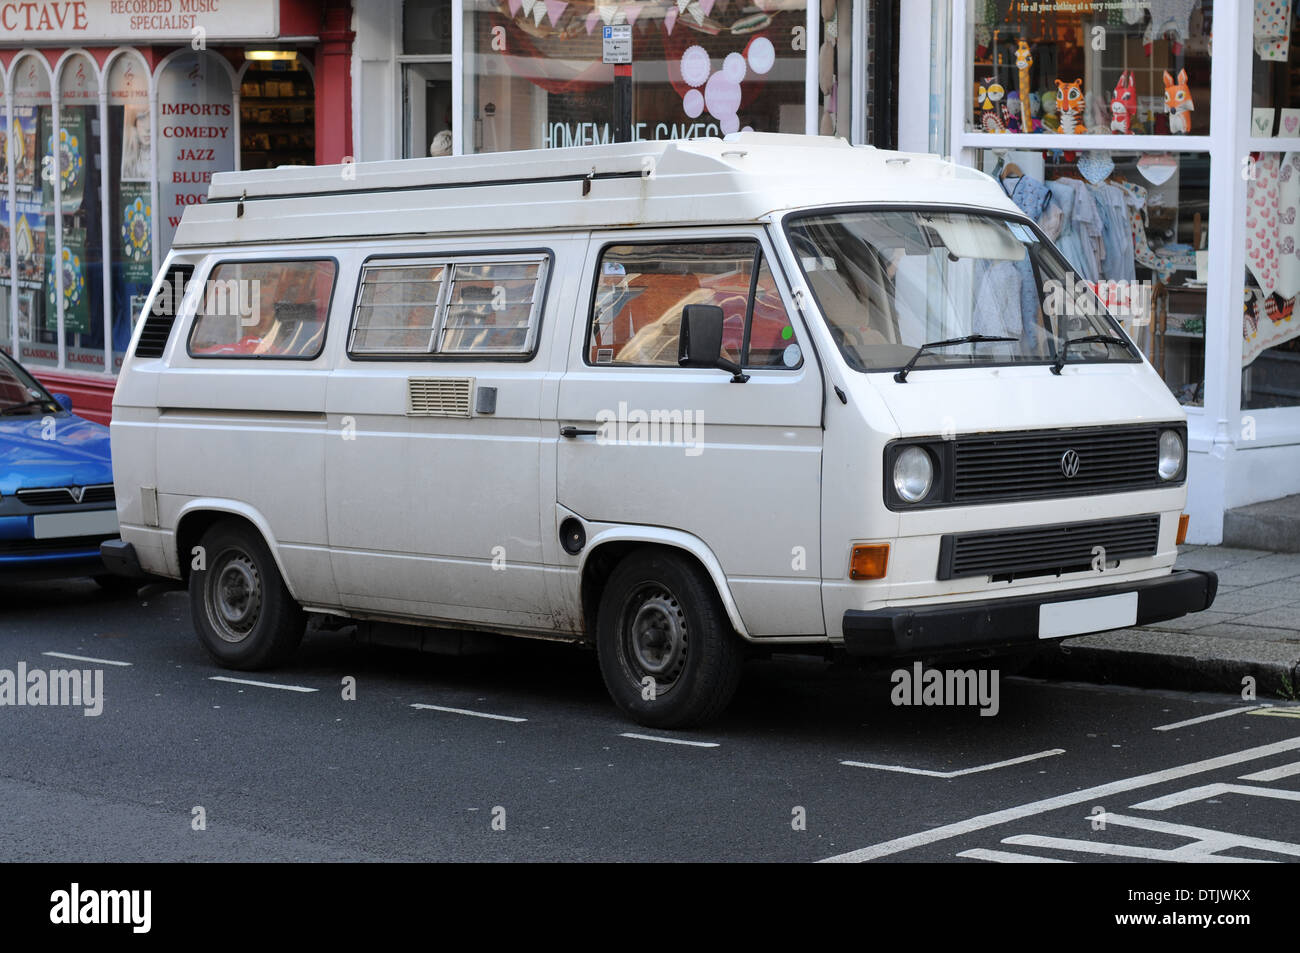 Old Vw Camper Van High Resolution Stock Photography and Images - Alamy